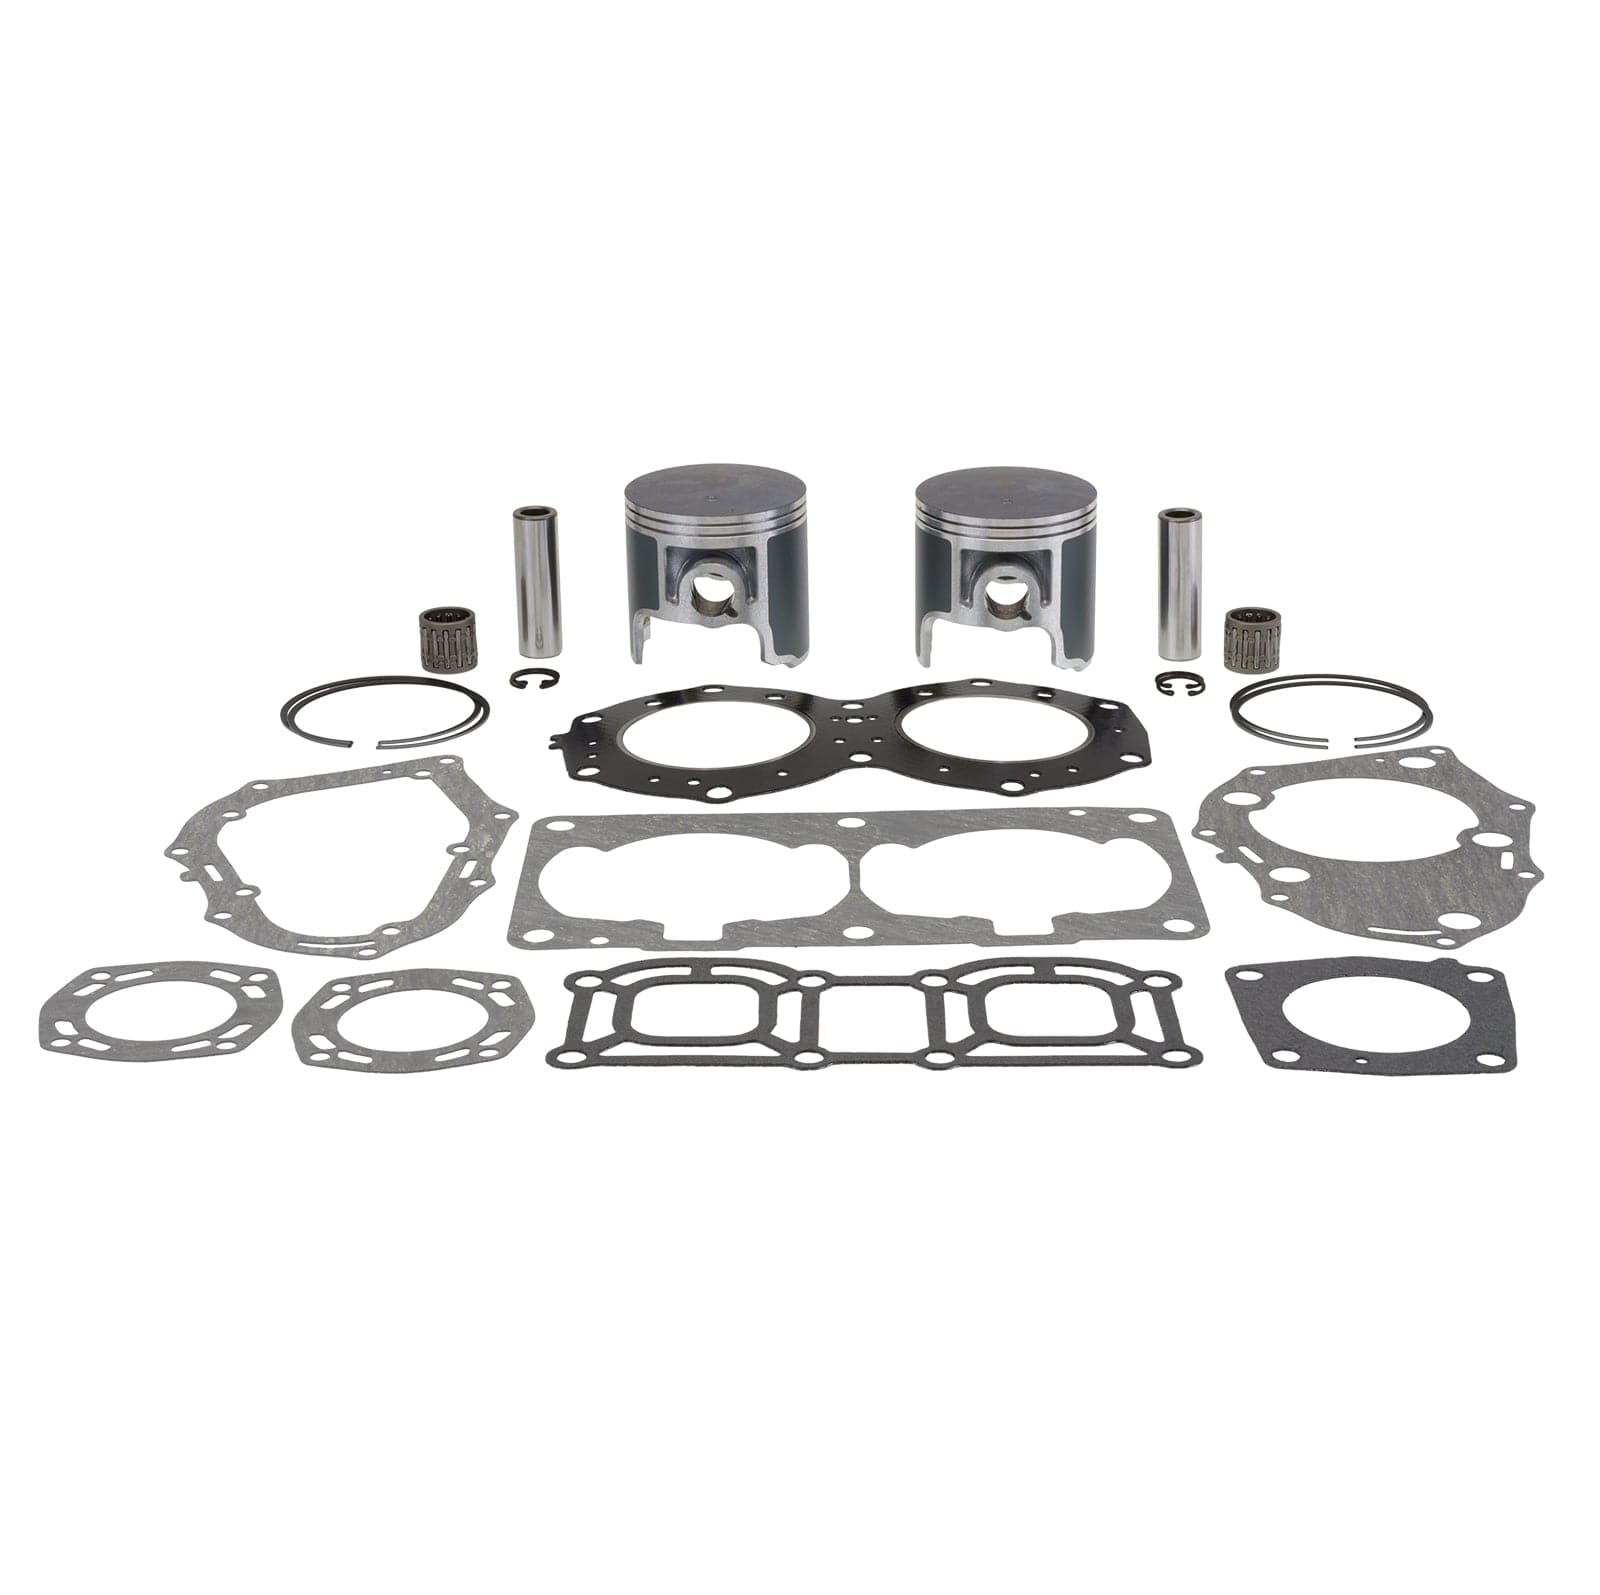 Top End Rebuild Kits for Jet Skis | Watercraft Superstore